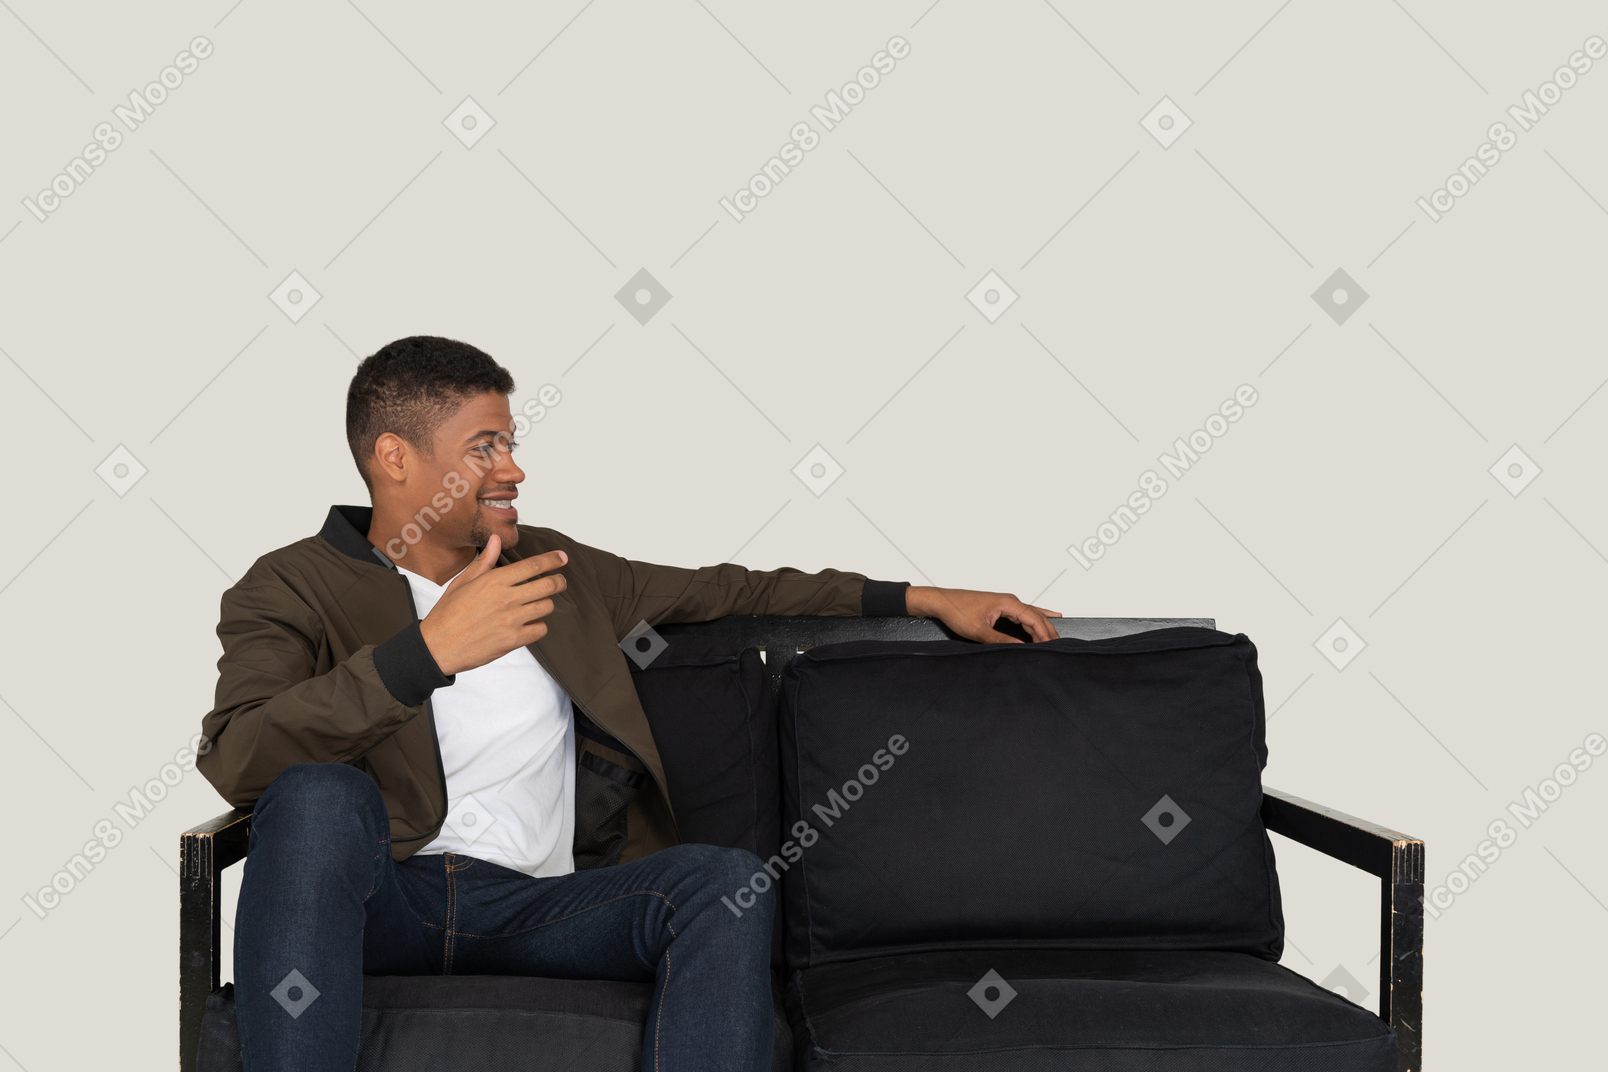 Smiling young man sitting on the sofa and telling something